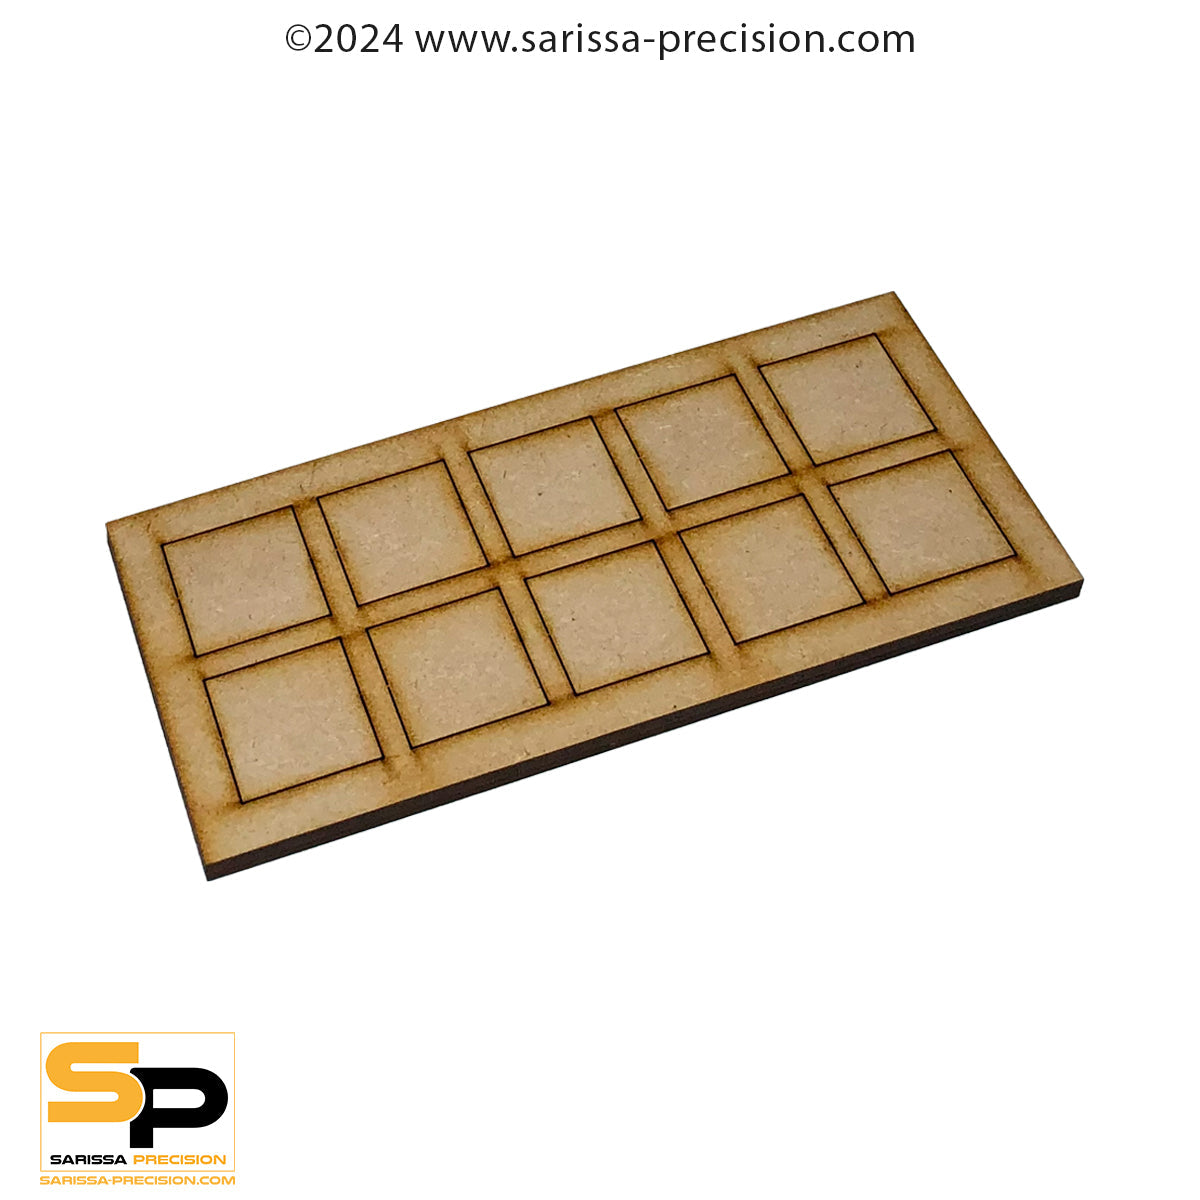 13x2 30x30mm Conversion Tray for 25x25mm bases